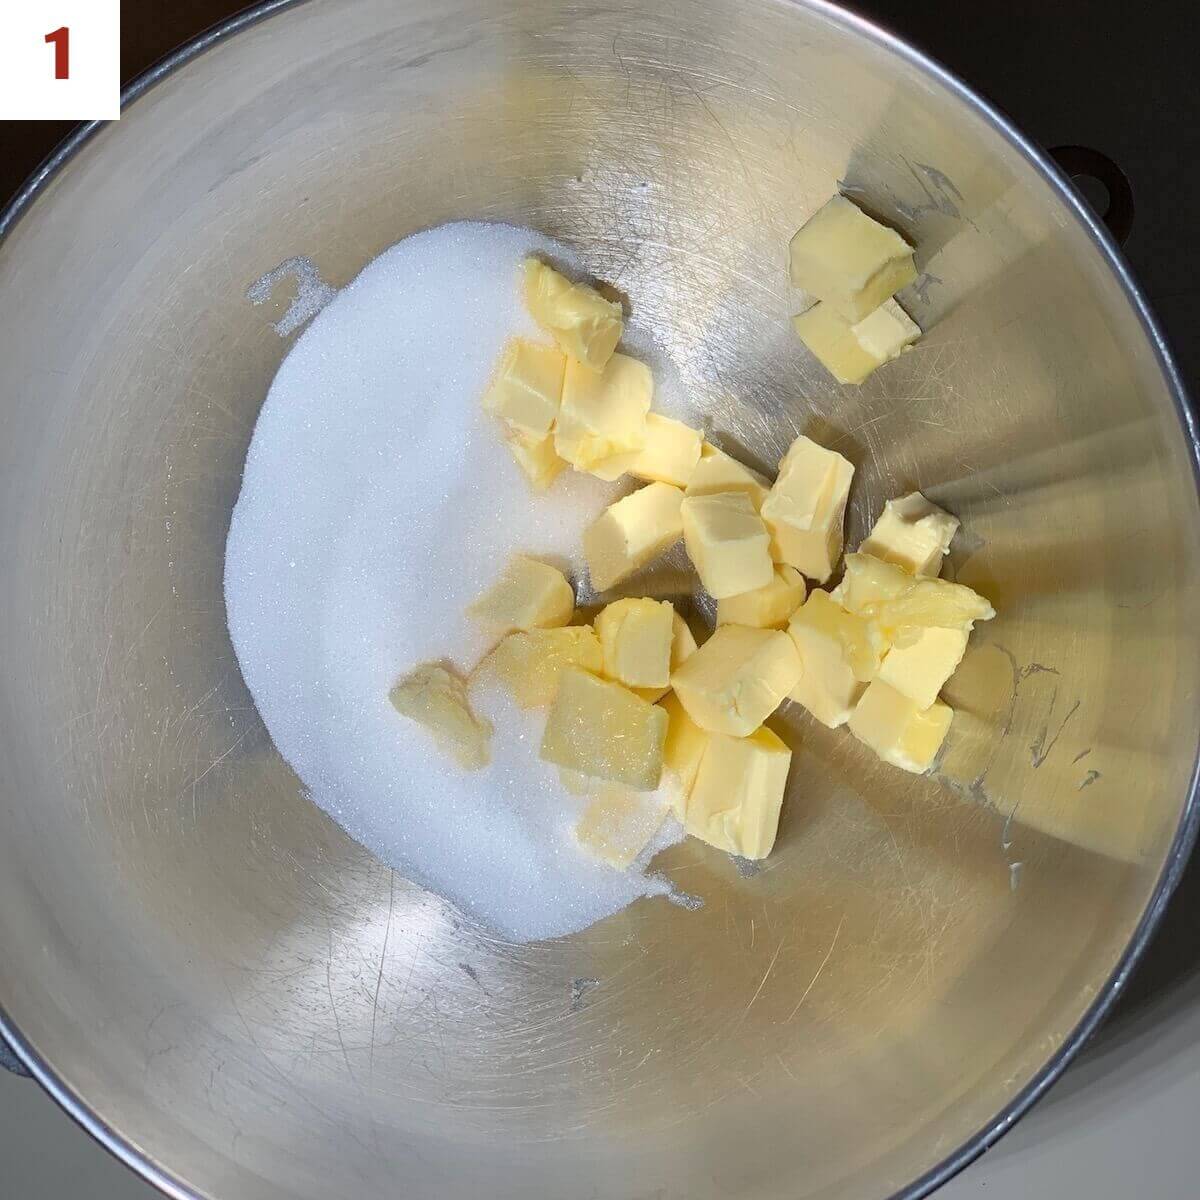 Cubed butter and sugar in a metal mixing bowl from overhead.